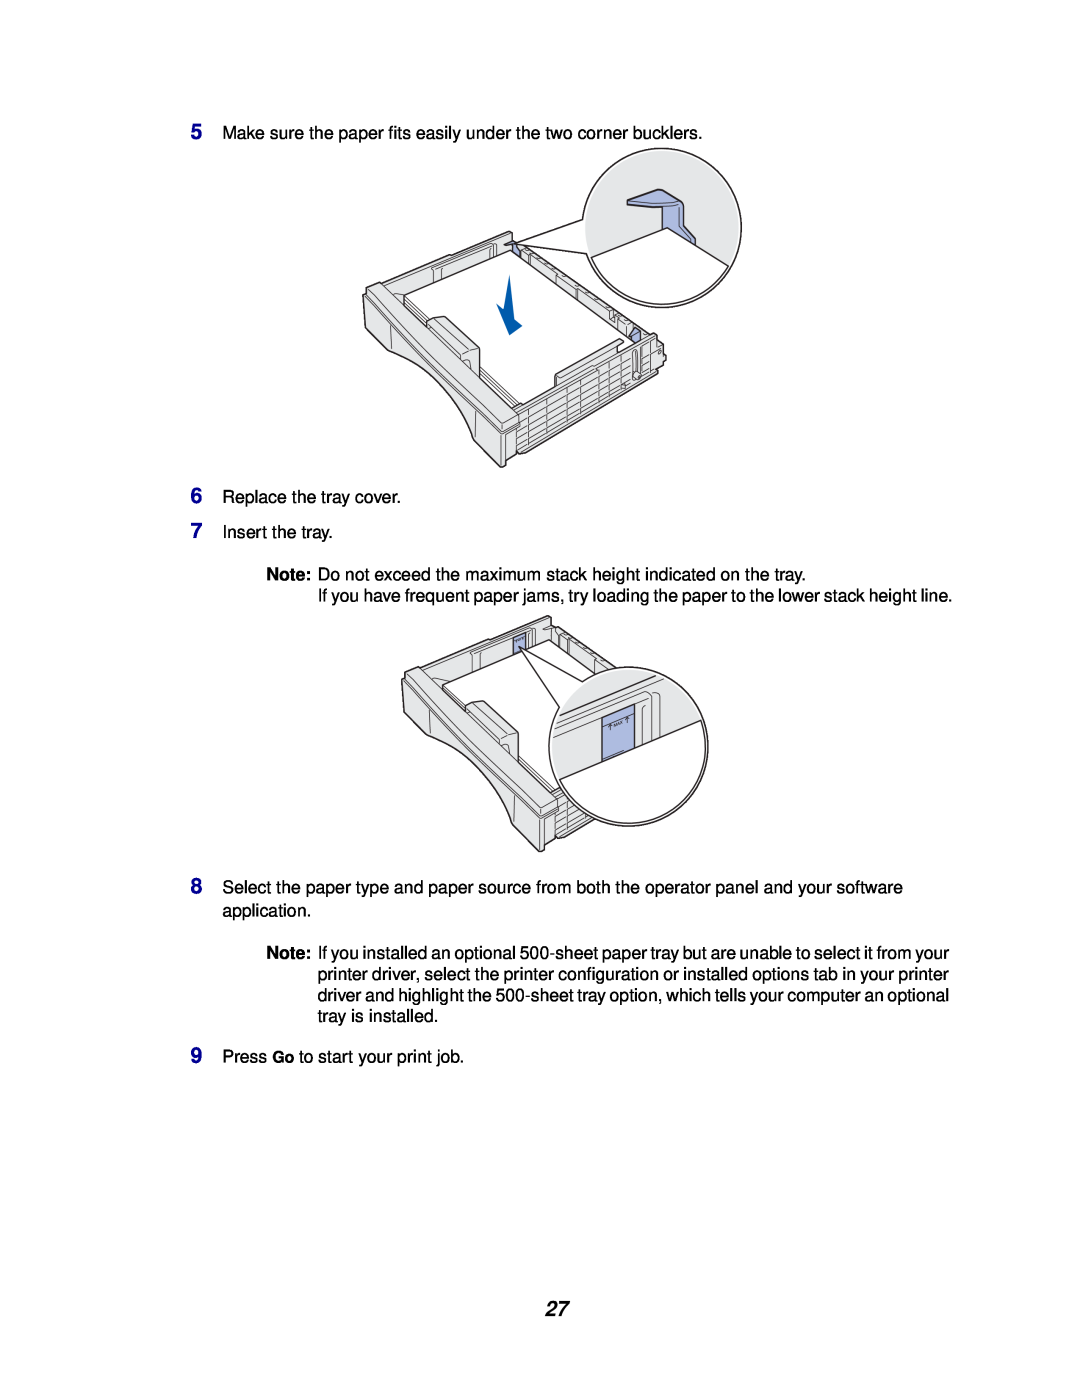 Lexmark 812 manual Make sure the paper fits easily under the two corner bucklers, Replace the tray cover 7 Insert the tray 